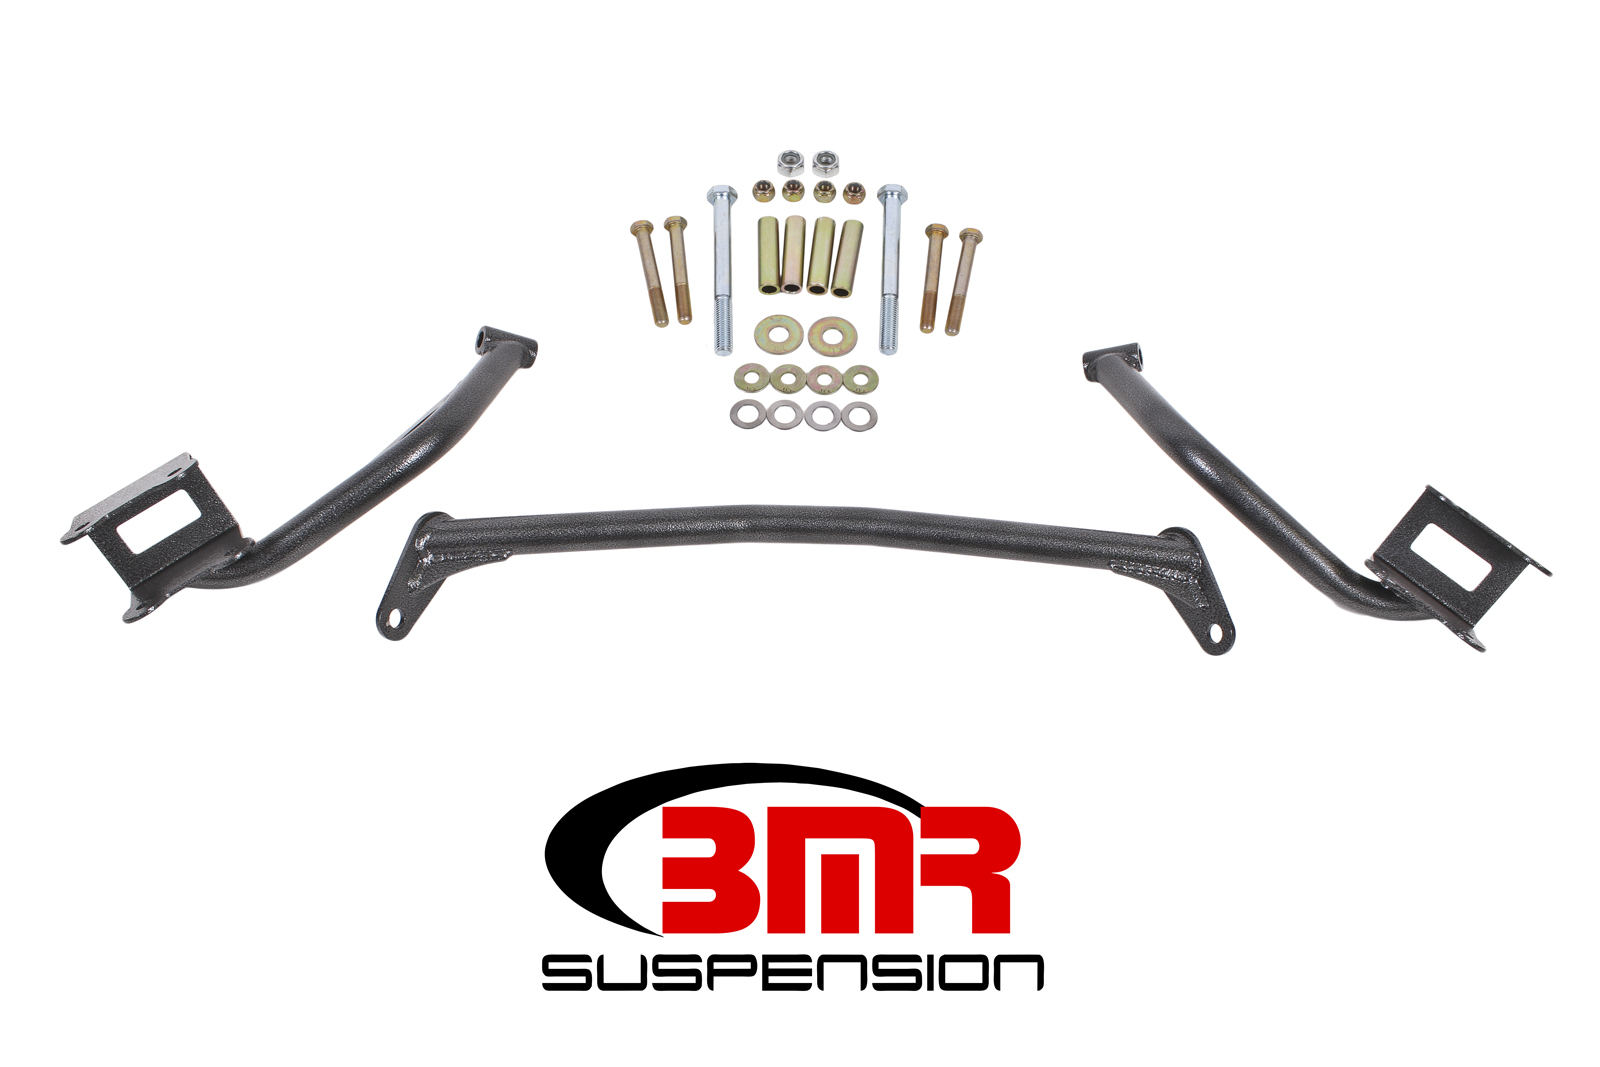 Torque Box Reinforcement Plate Kit, Upper Only (tubular Style), Fits 1979-2004 Mustang , BMR Suspension - TBR005H